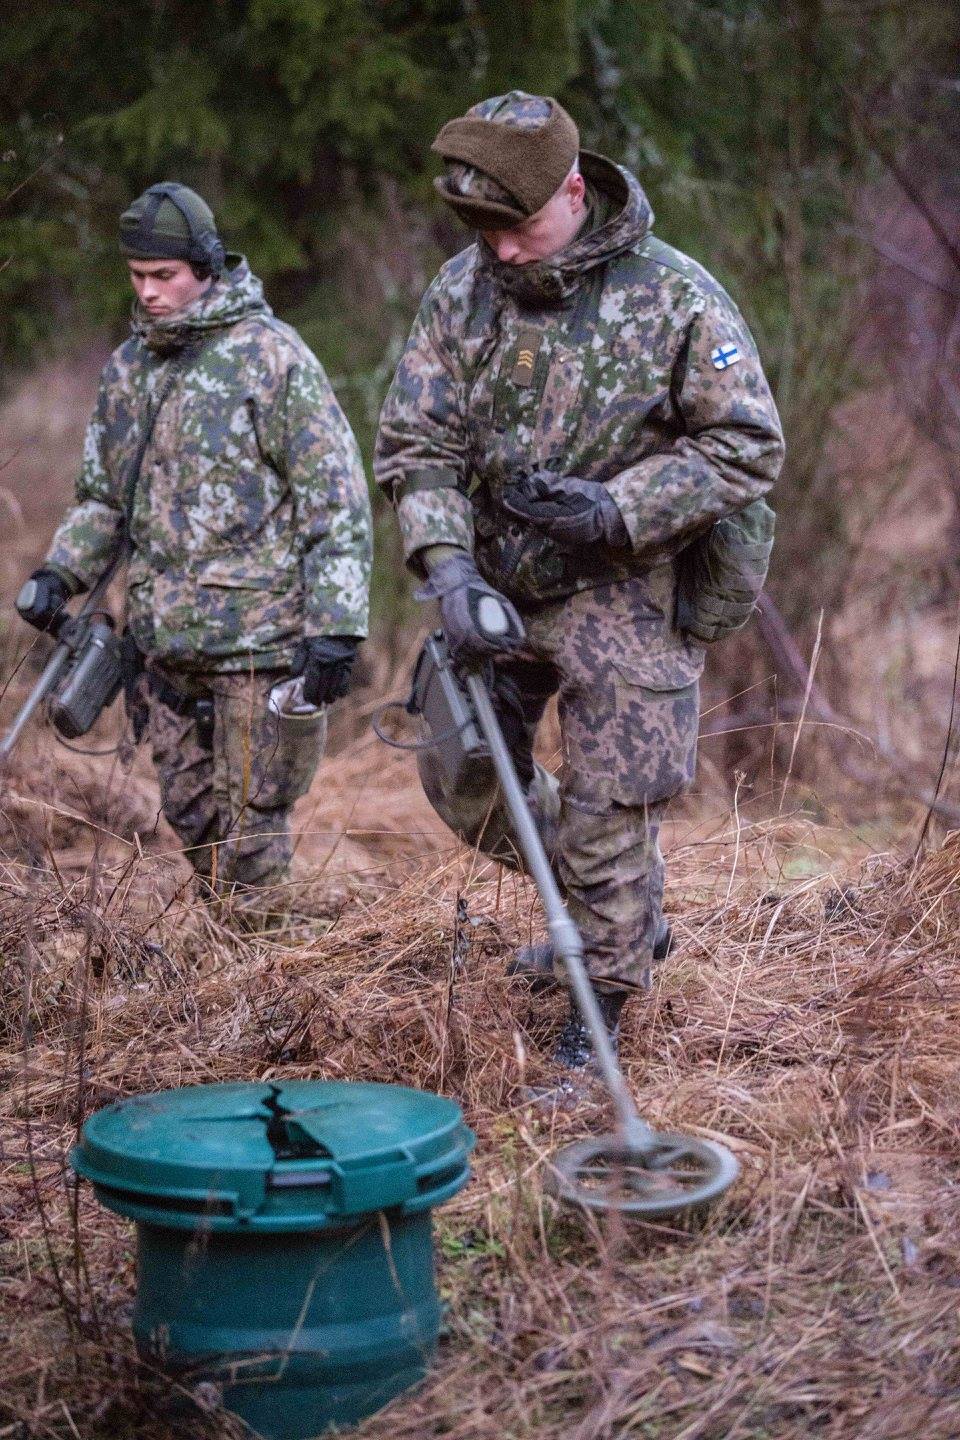 Two soldiers in the woods with metal detectors.